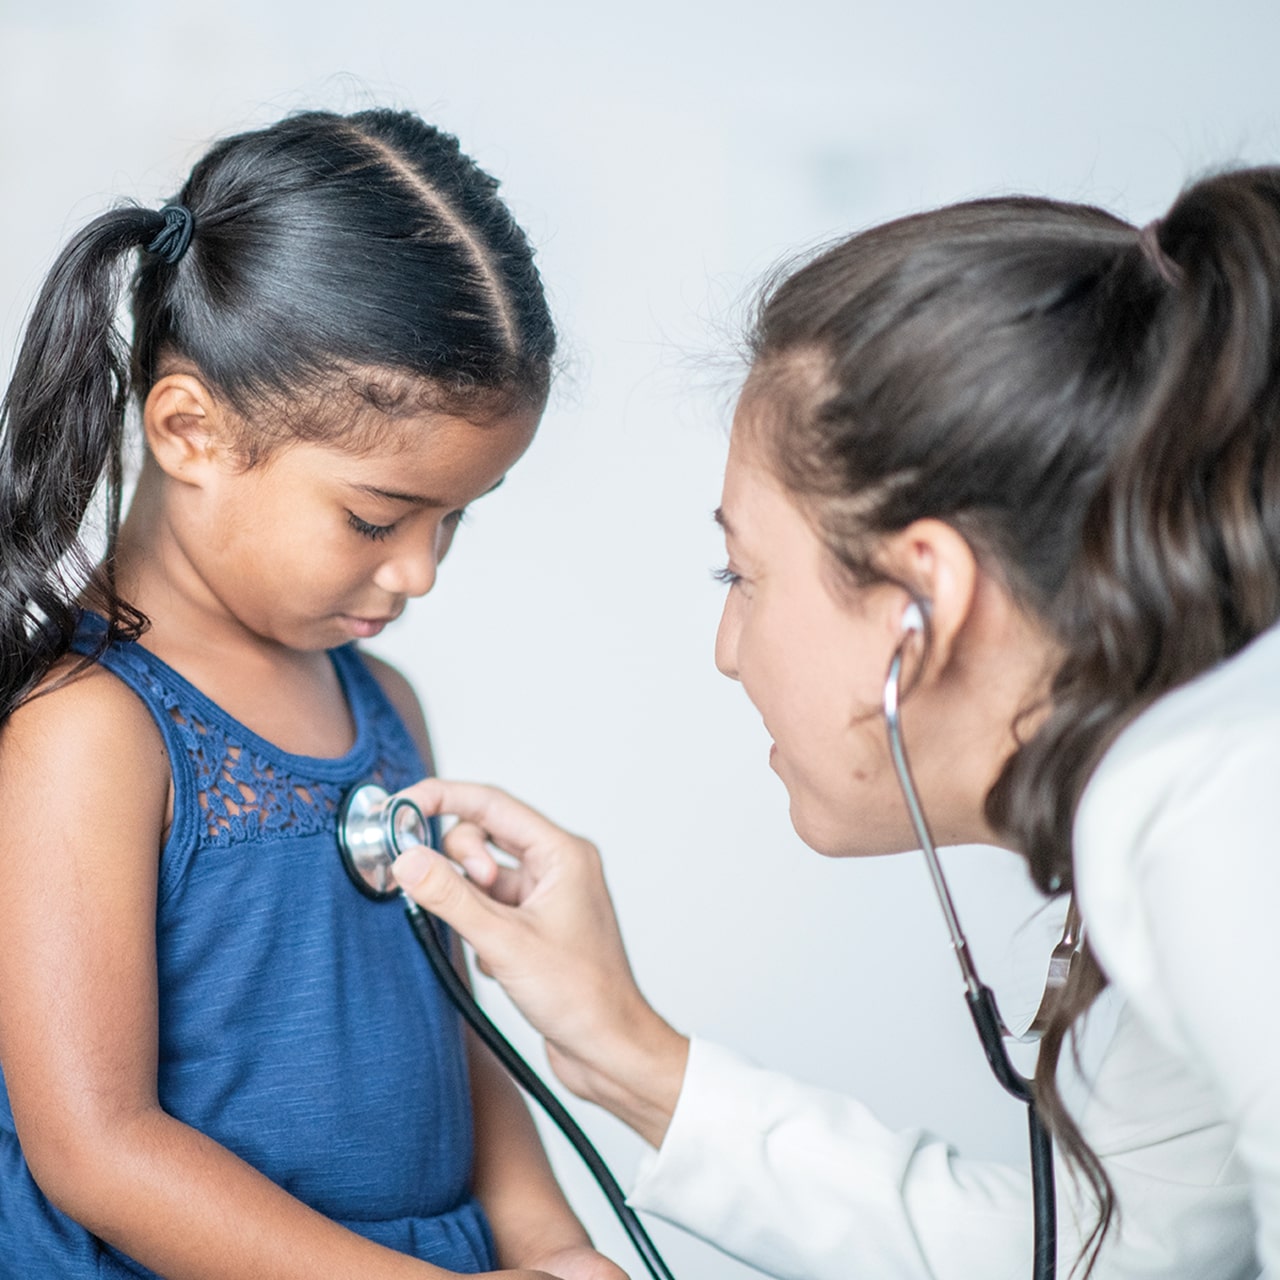 Young girl gets a checkup from the doctor